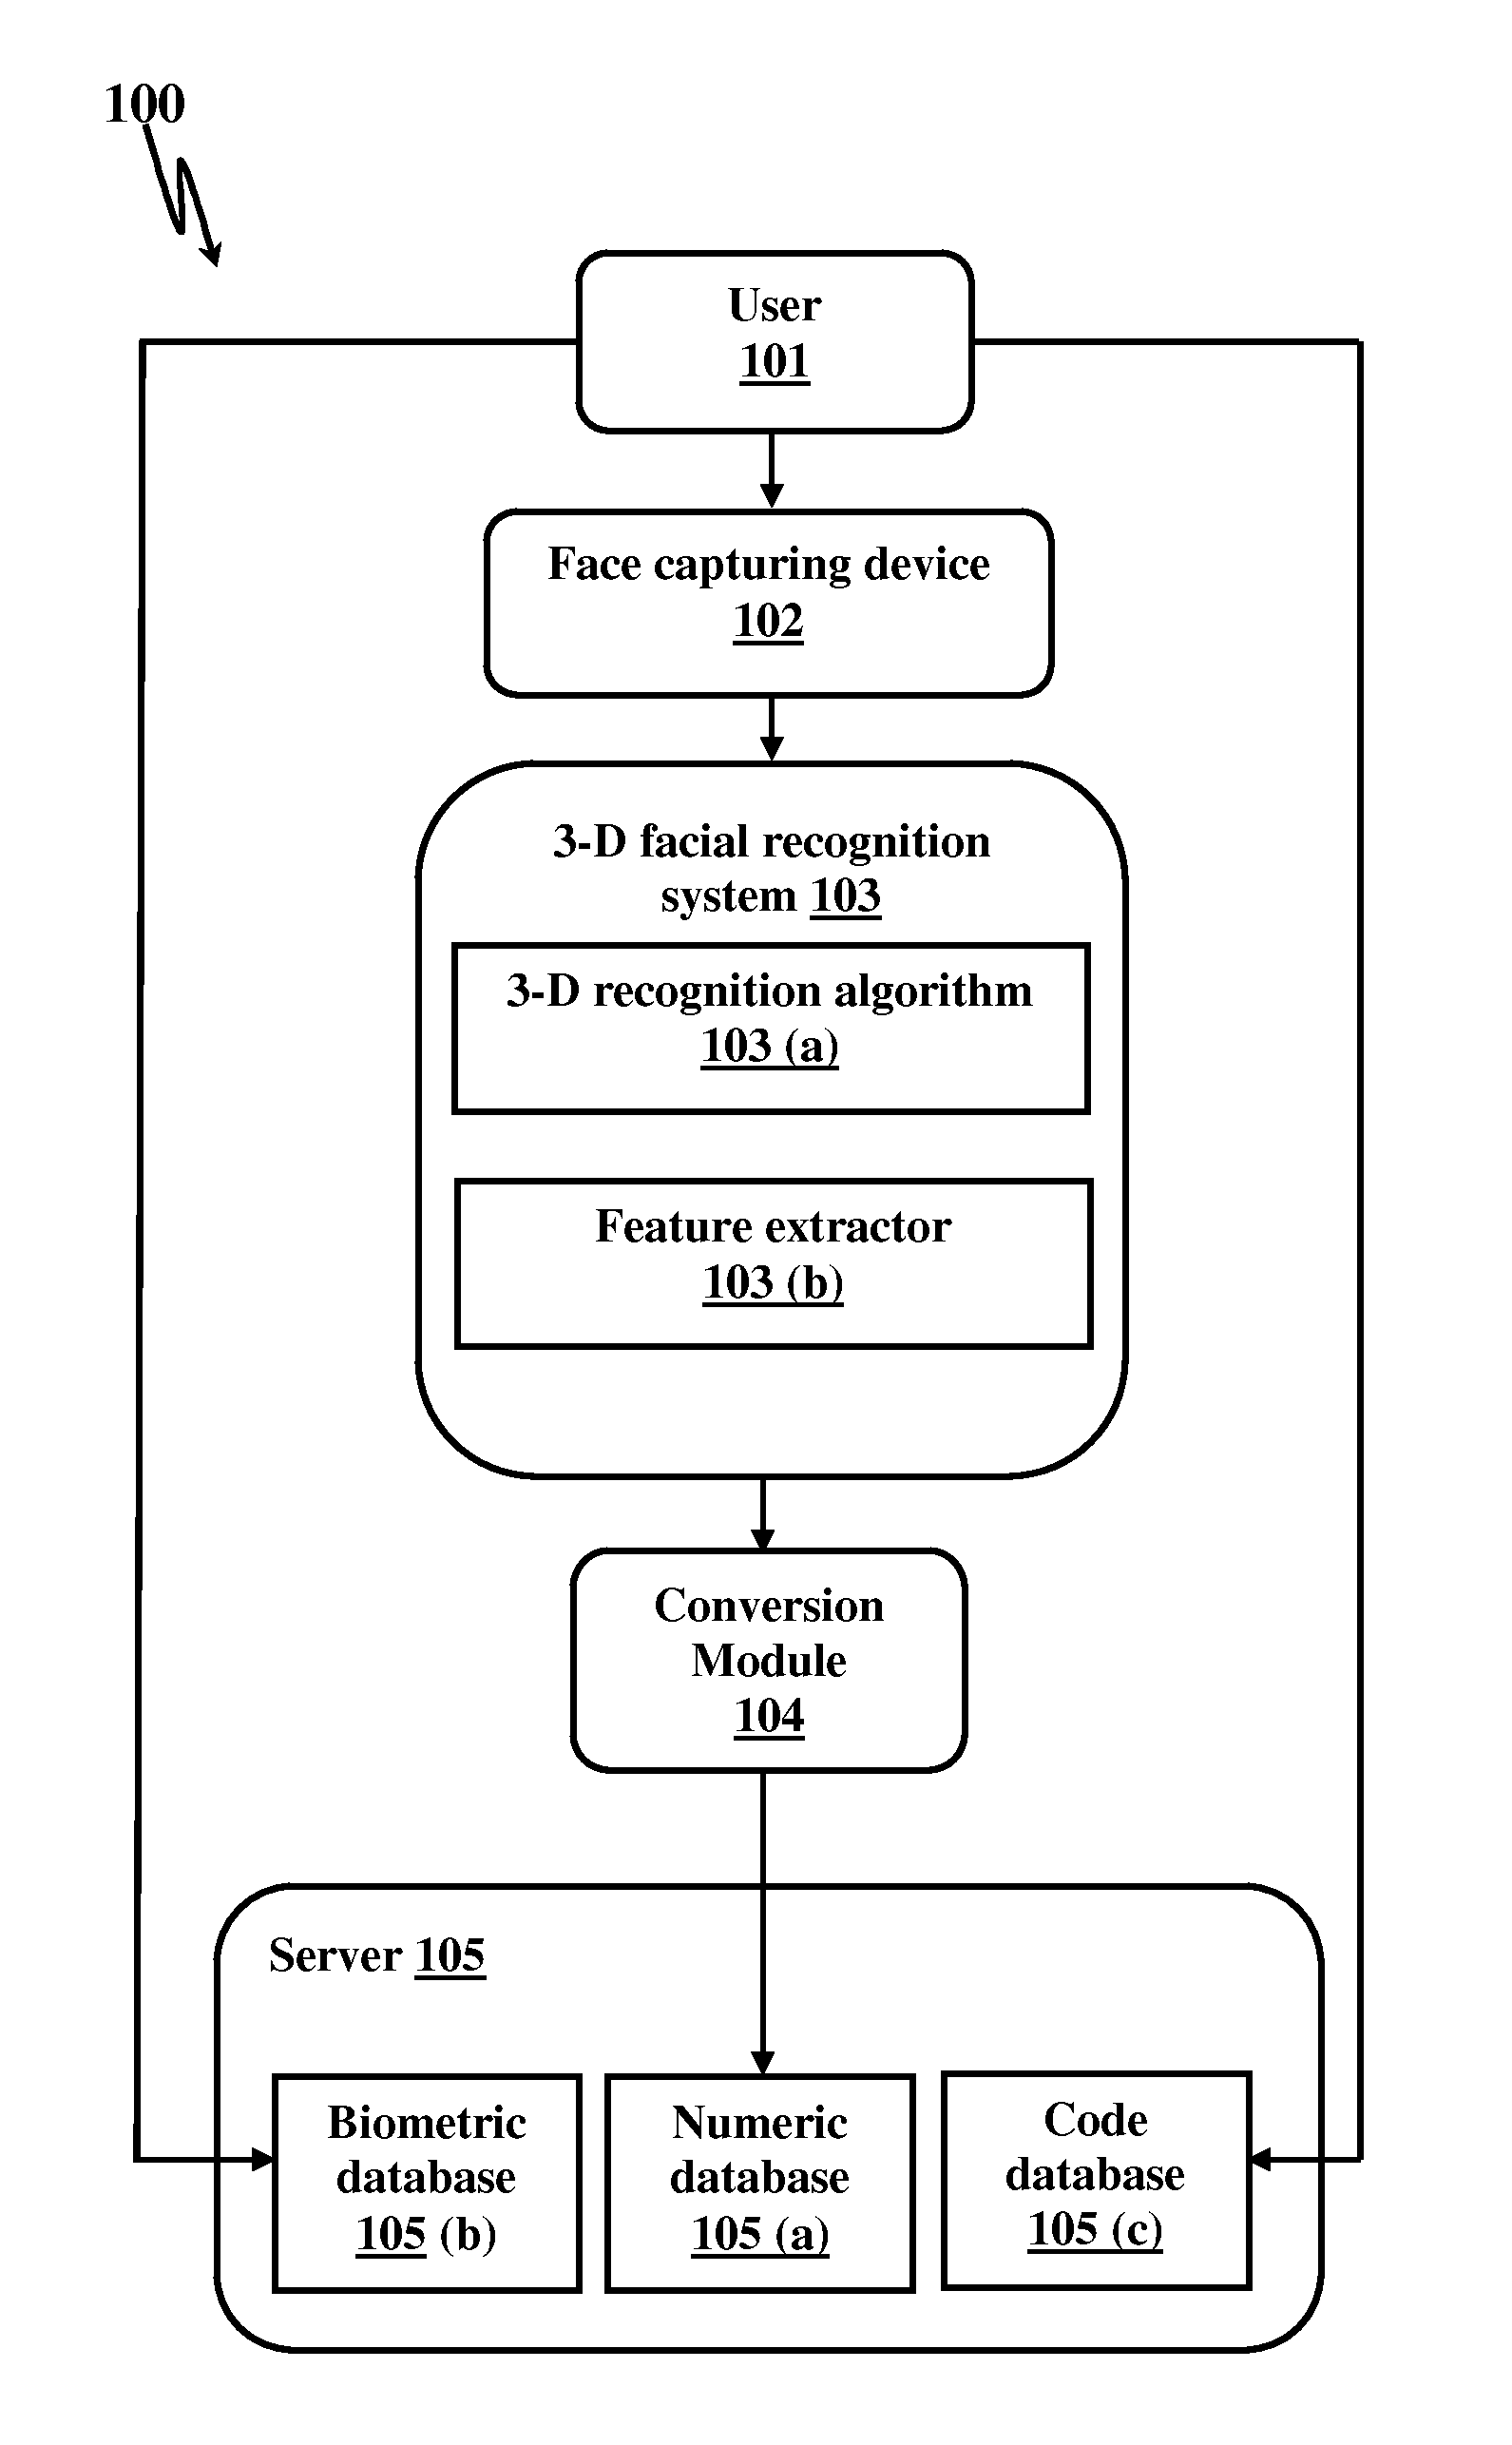 System and method for cardless financial transaction using facial biomertics